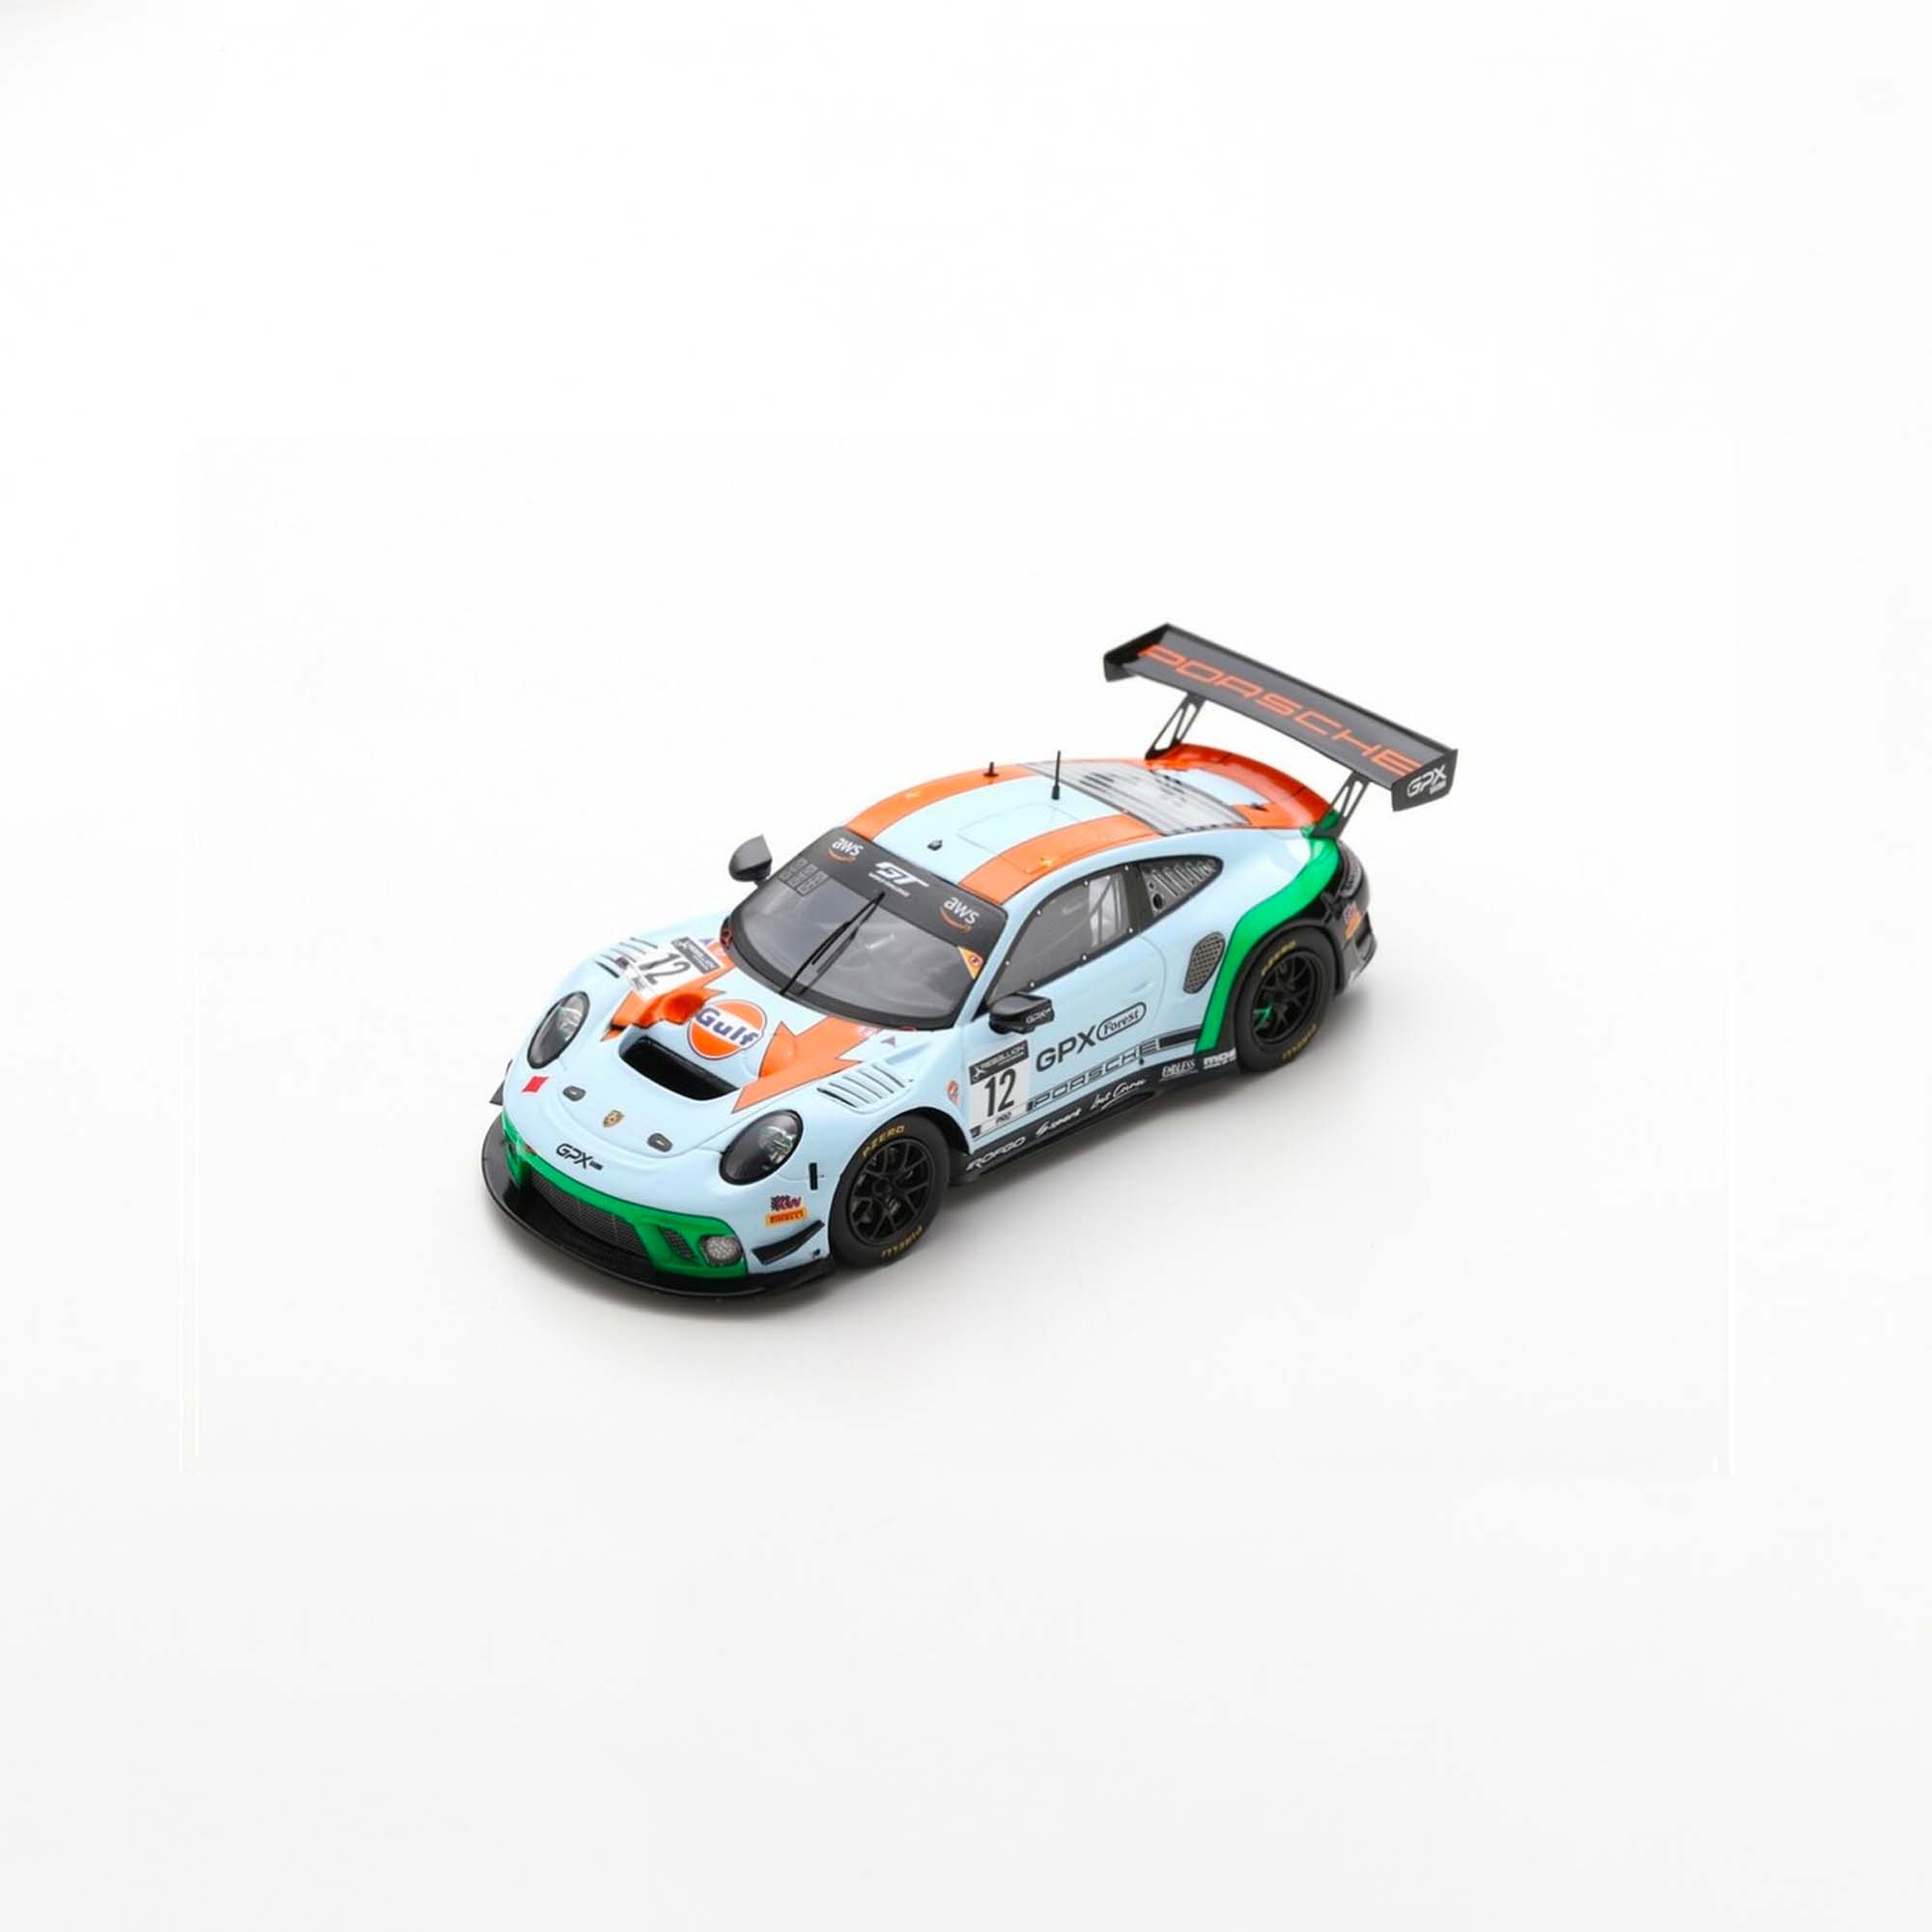 Porsche 911 GT3 R Team GPX Racing No. 12 "The Diamond" | 1:43 Scale Model-1:43 Scale Model-Spark Models-gpx-store